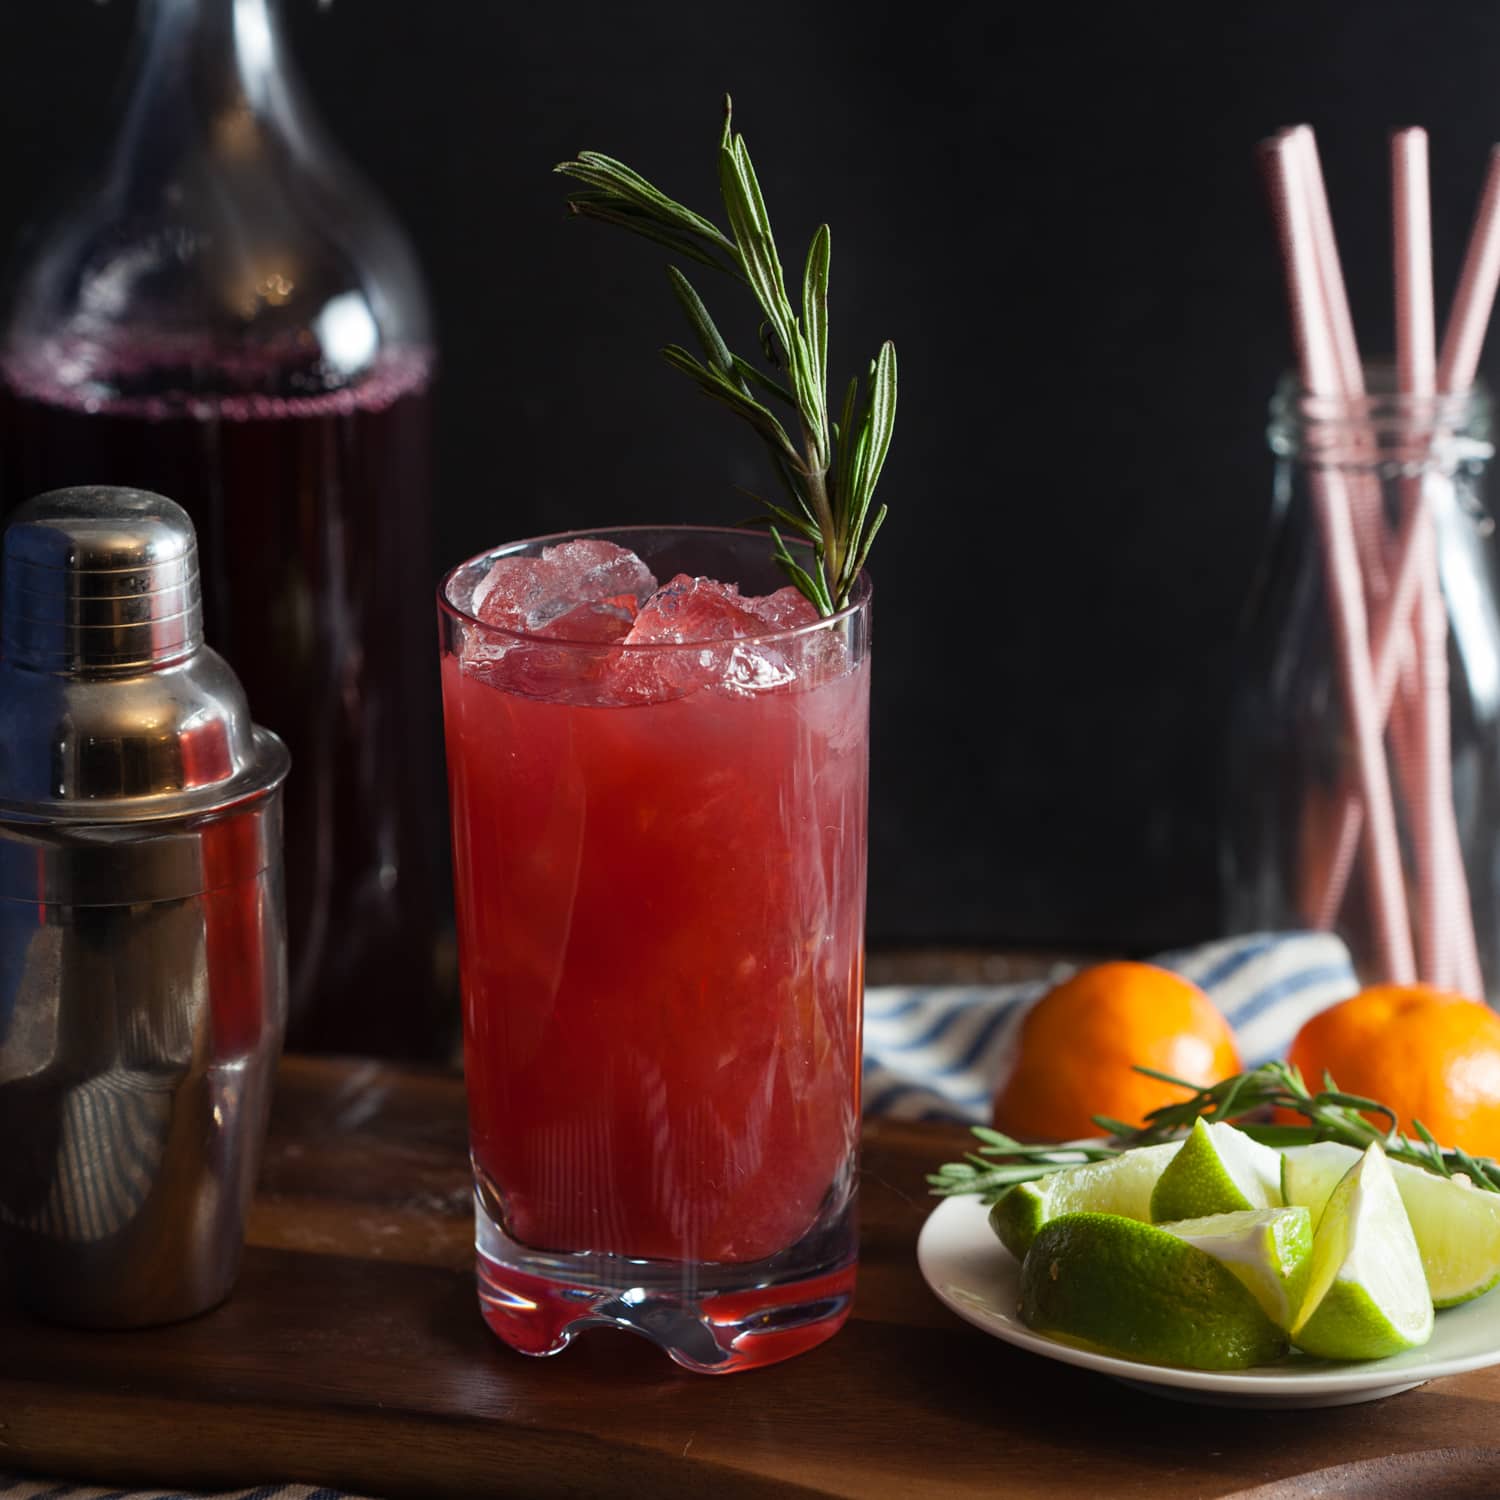 Sparkling Cranberry-Clementine Gin Cocktail with Rosemary + Honey